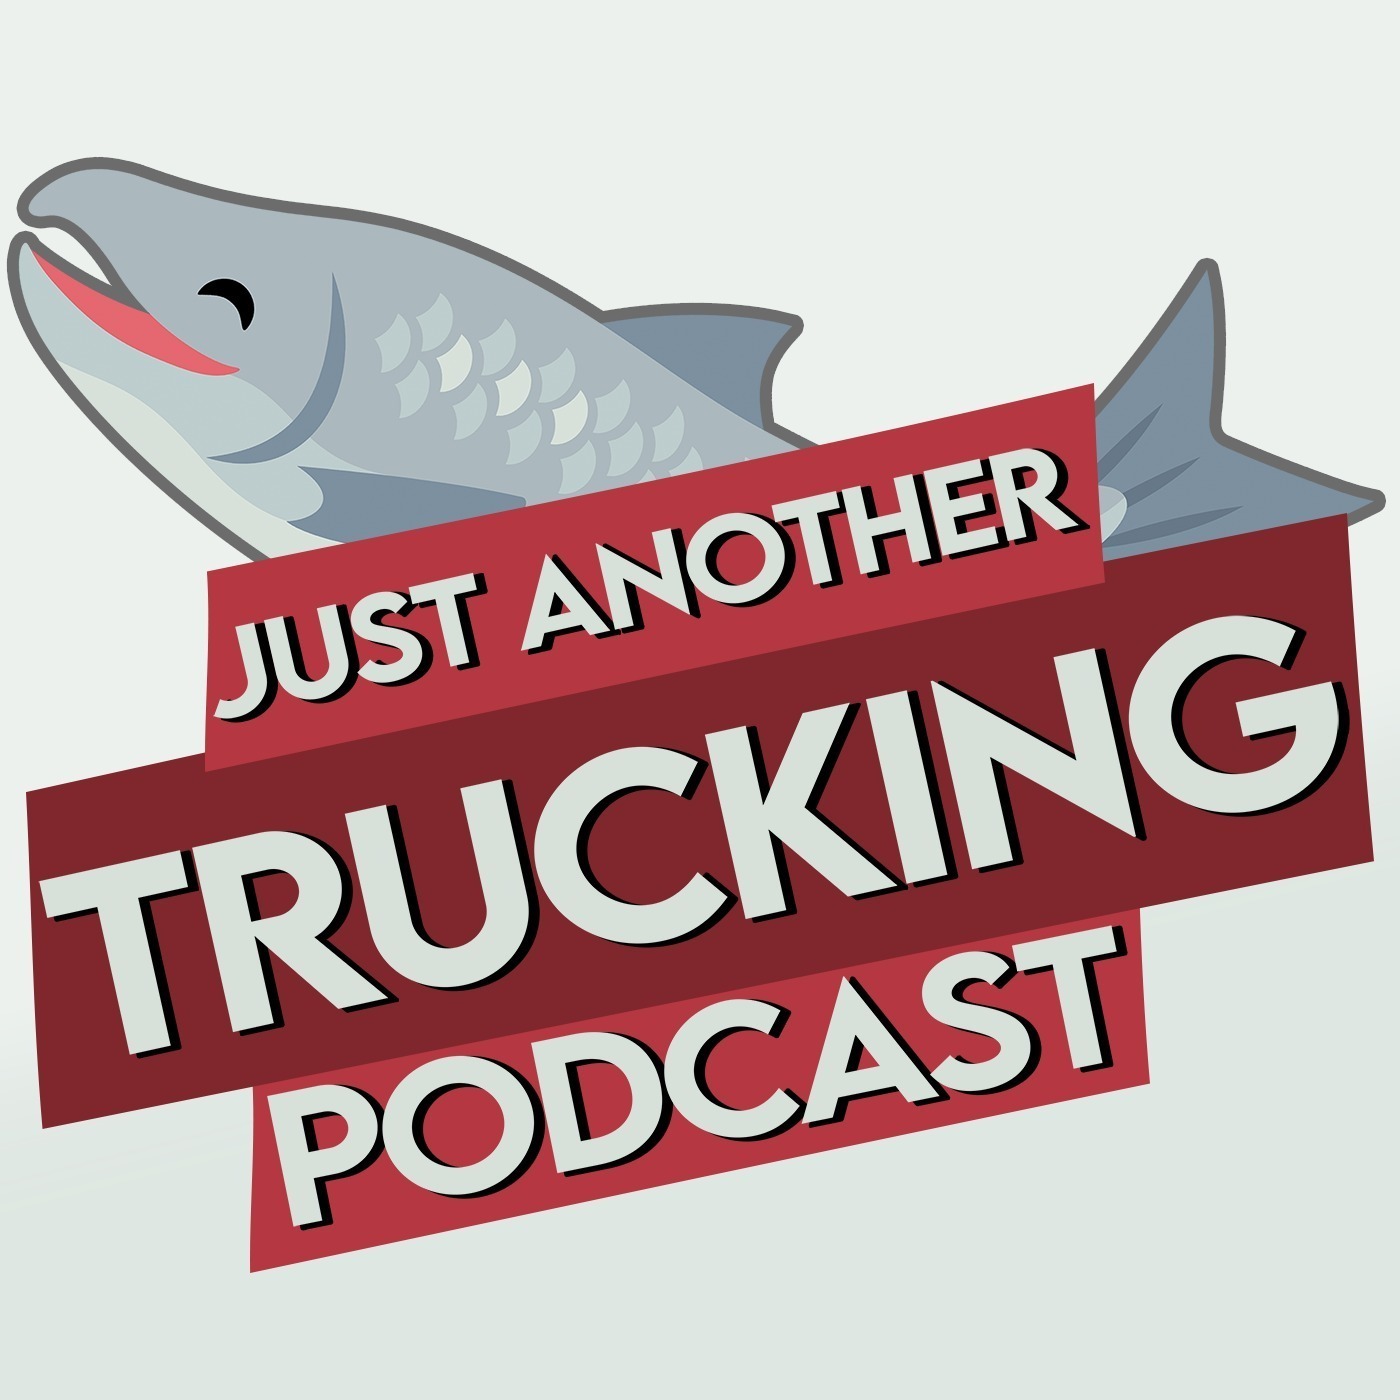 Why don’t truckerS take sick days? Just Another Trucking Podcast